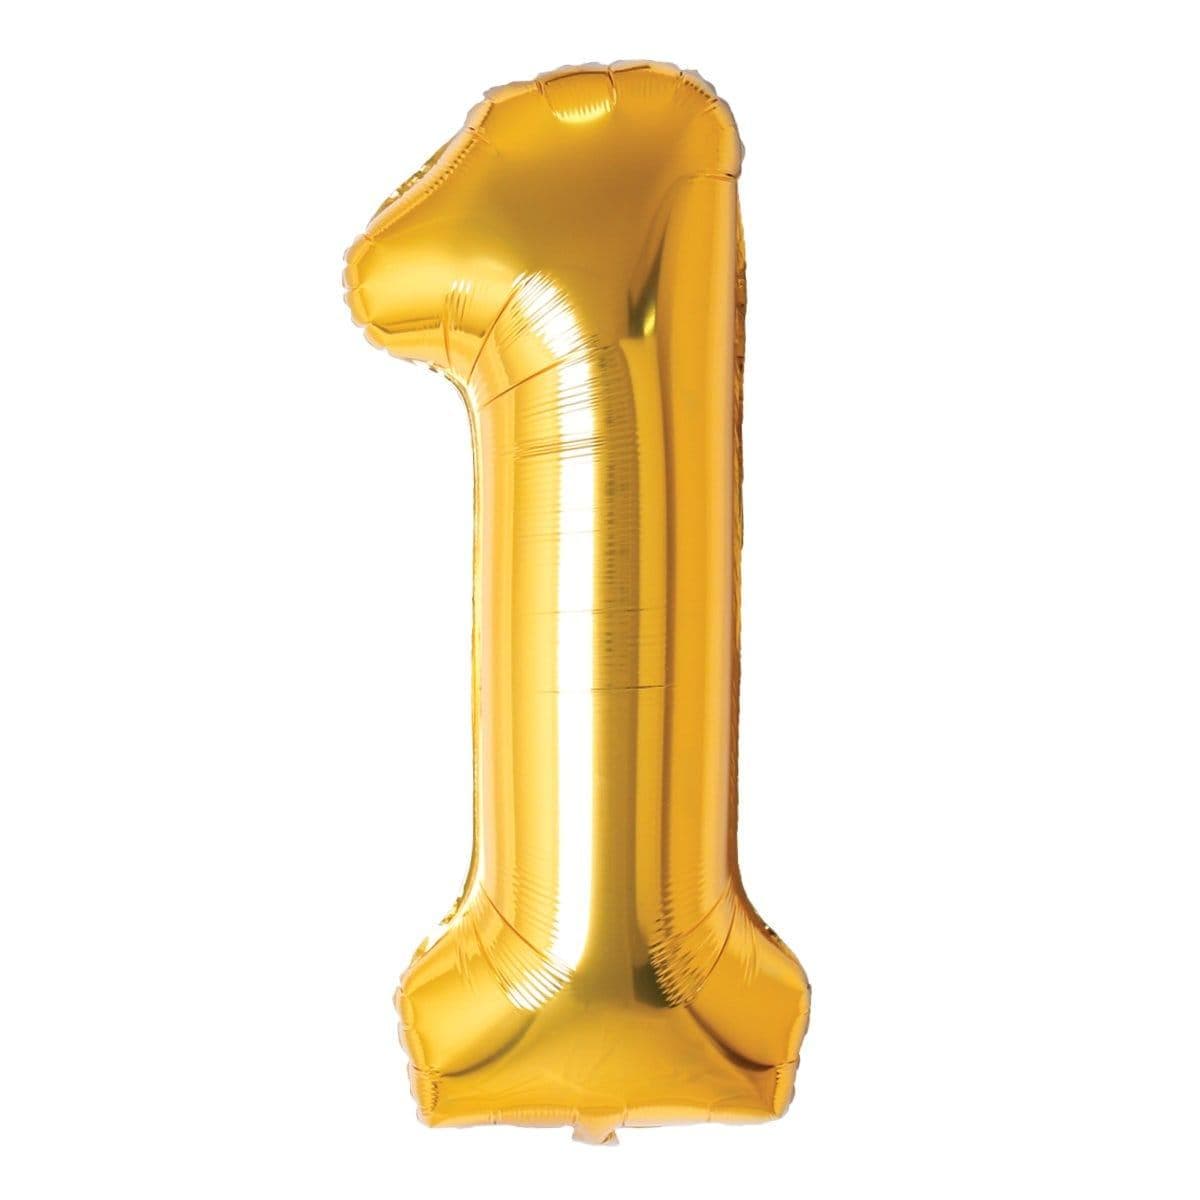 Buy Balloons Gold Number 1 Foil Balloon, 34 Inches sold at Party Expert